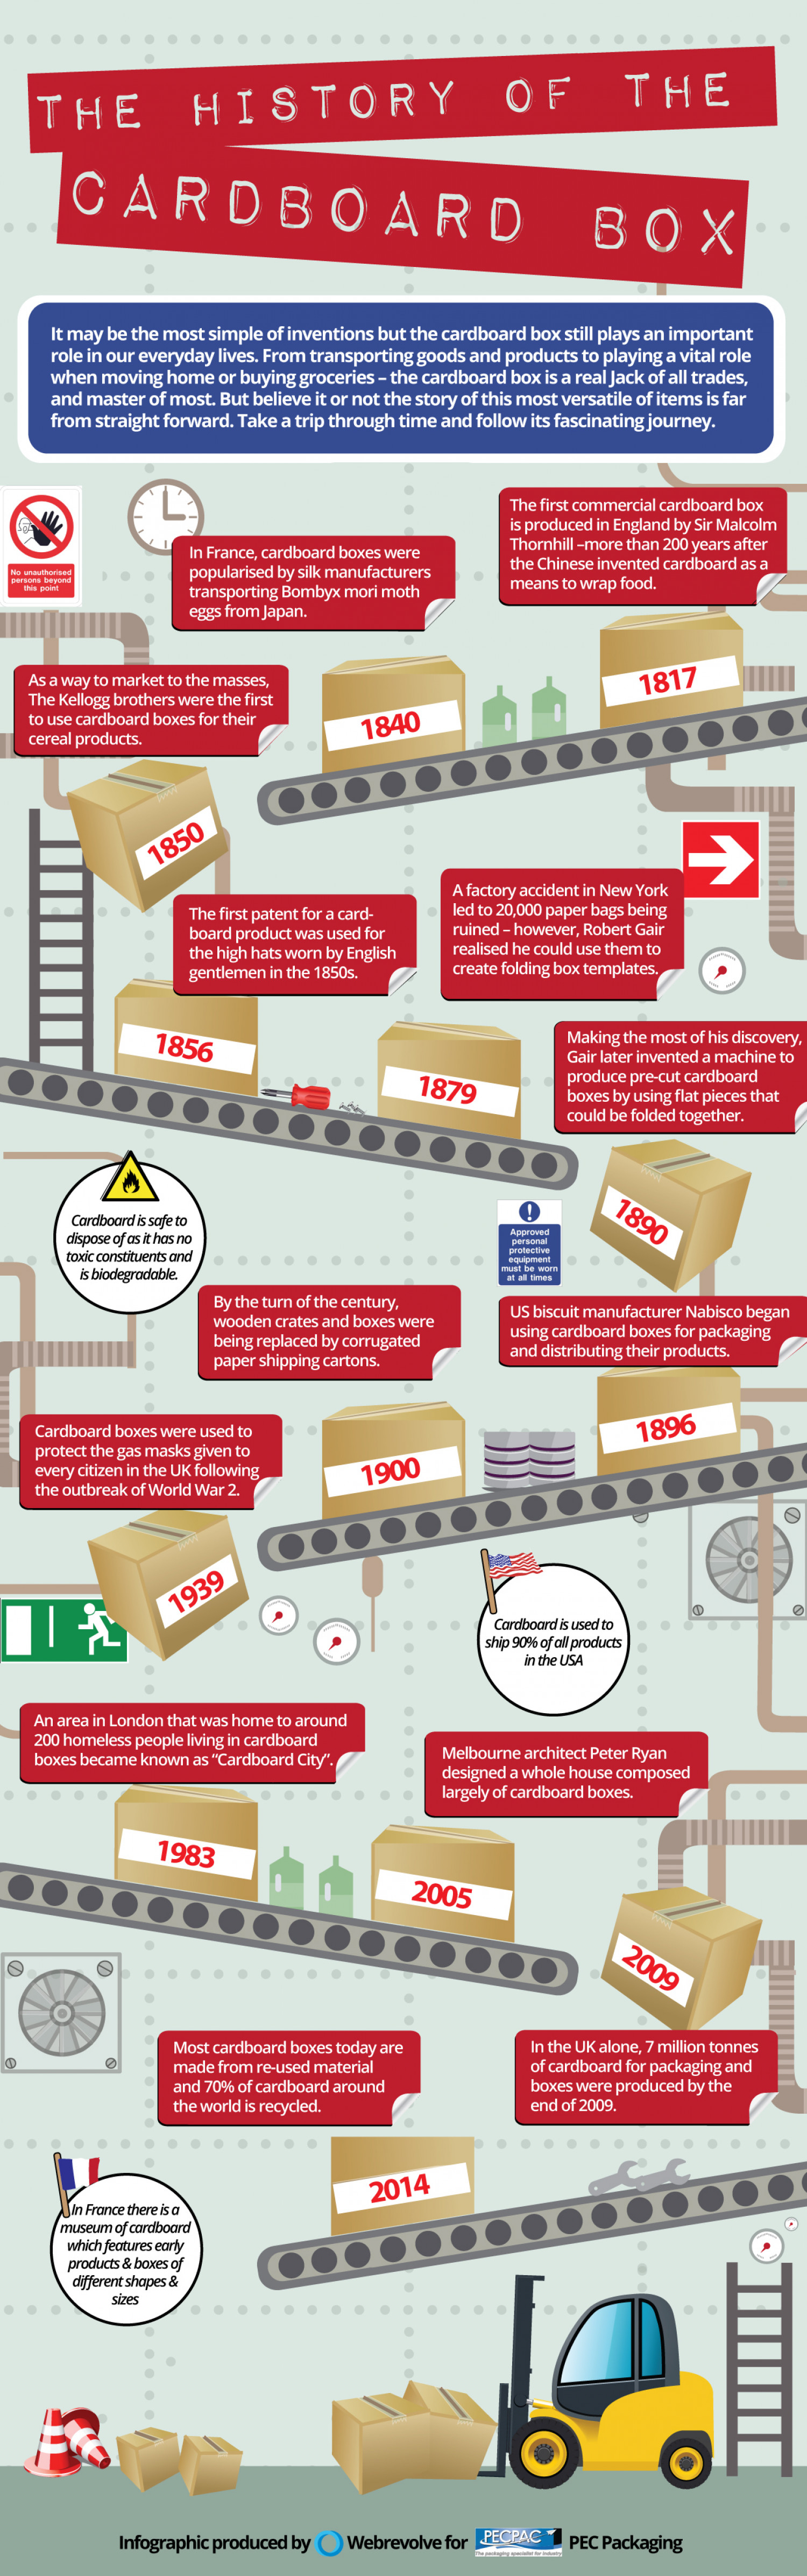 The History of the Cardboard Box Infographic